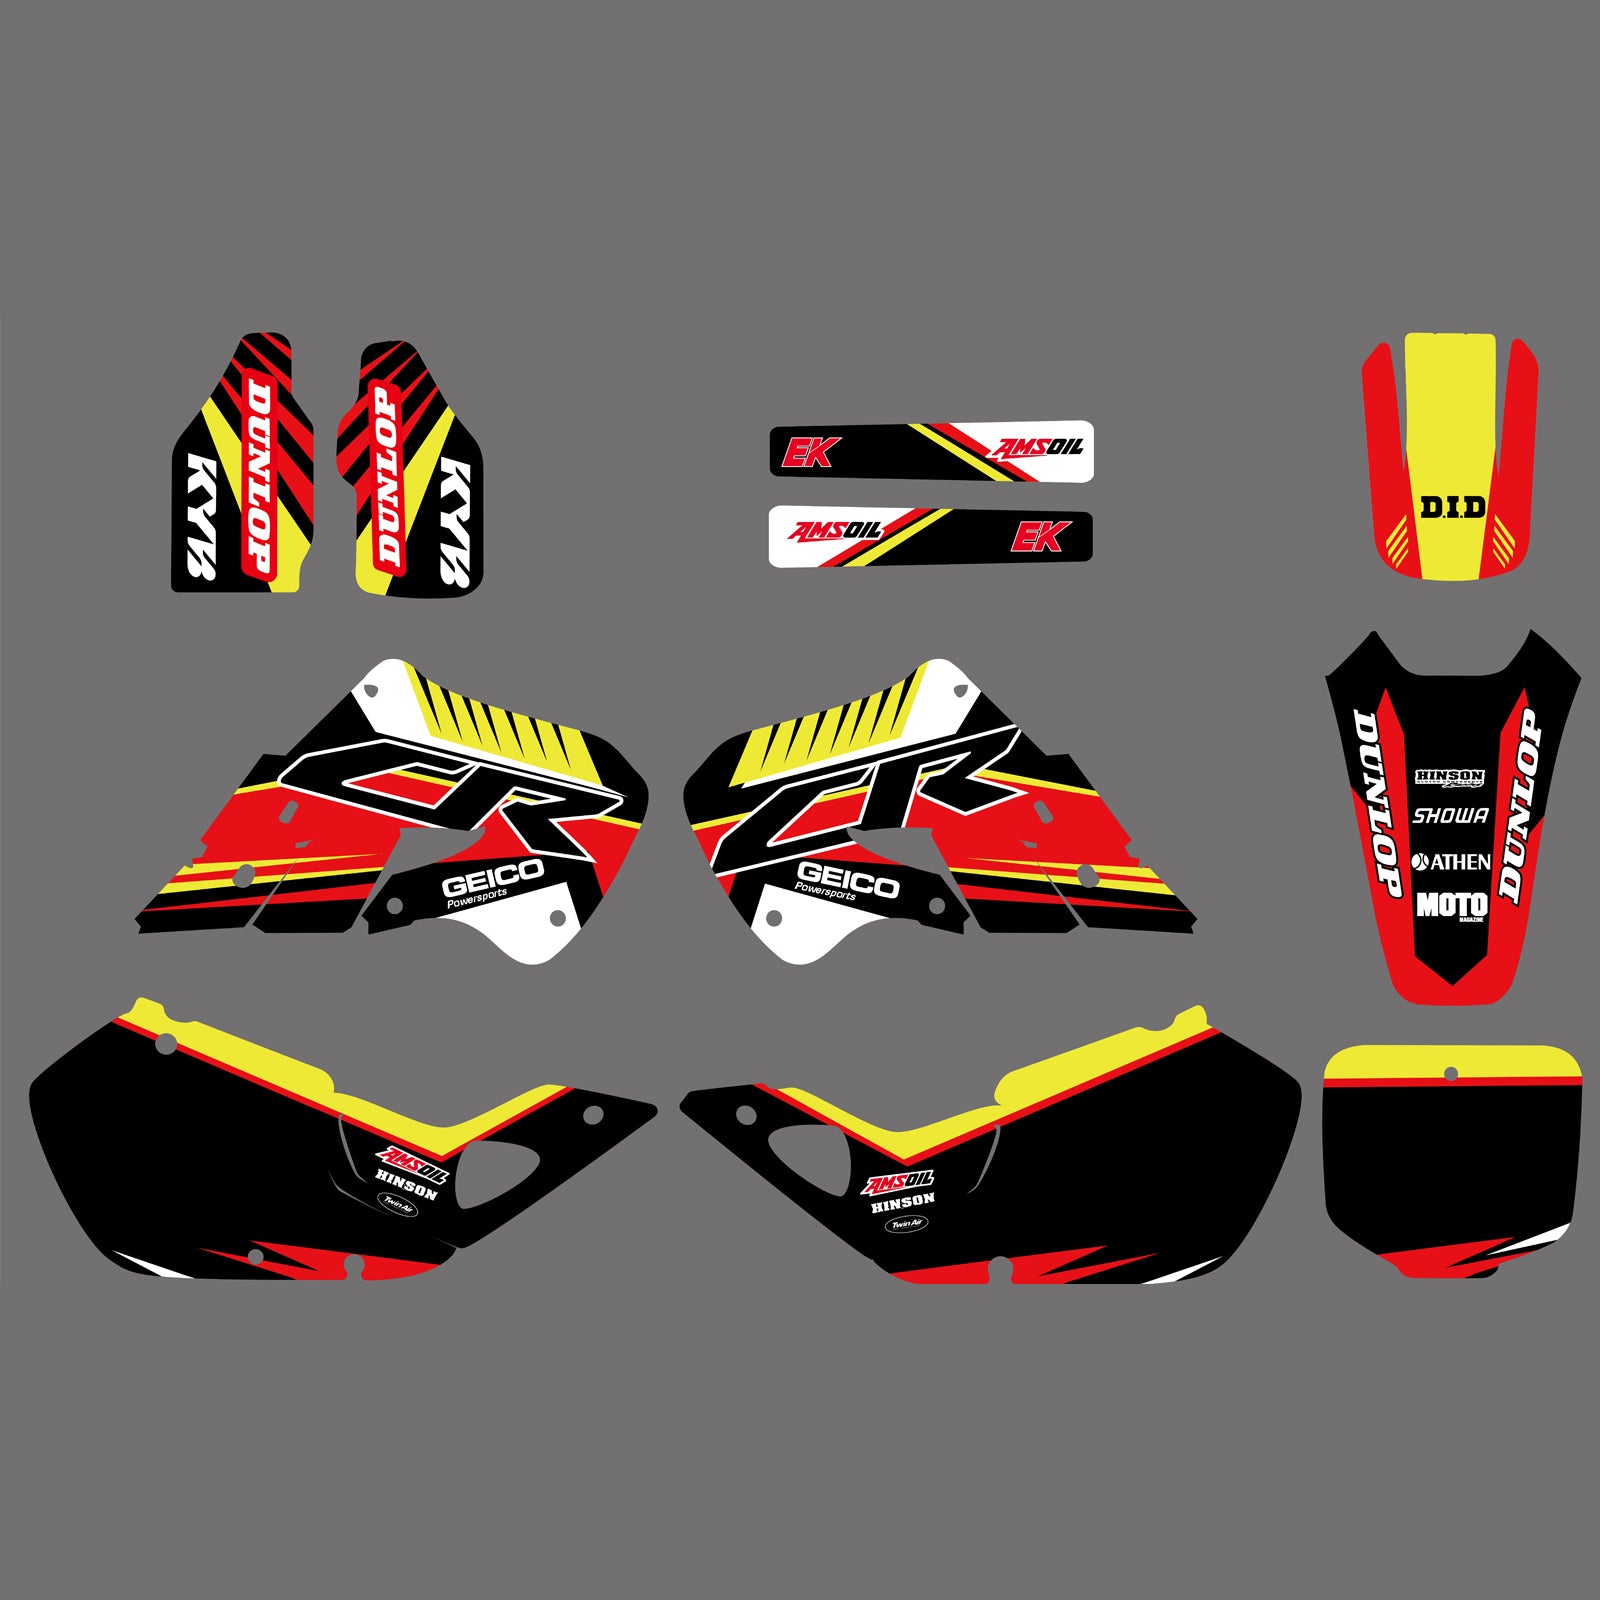 Full  Decals Graphics Backgrounds Stickers For Honda CR125 1998-1999 CR250 1997-1999